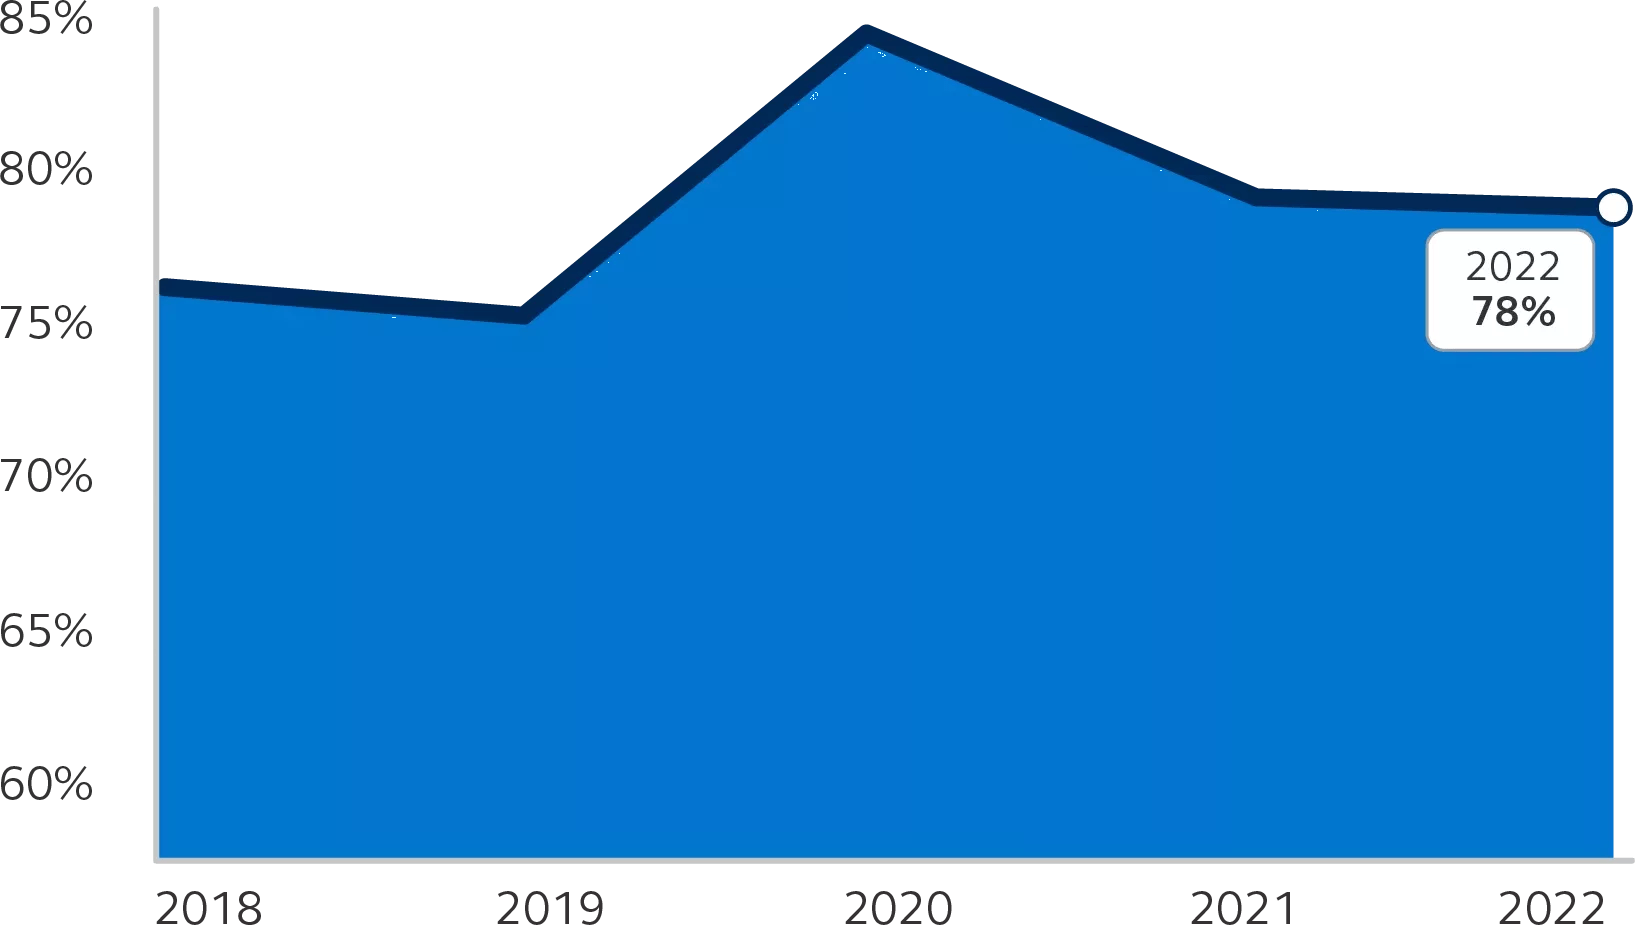 Graph showing our employee engagement index from 2018 to 2022, in 2022 it is 78%.